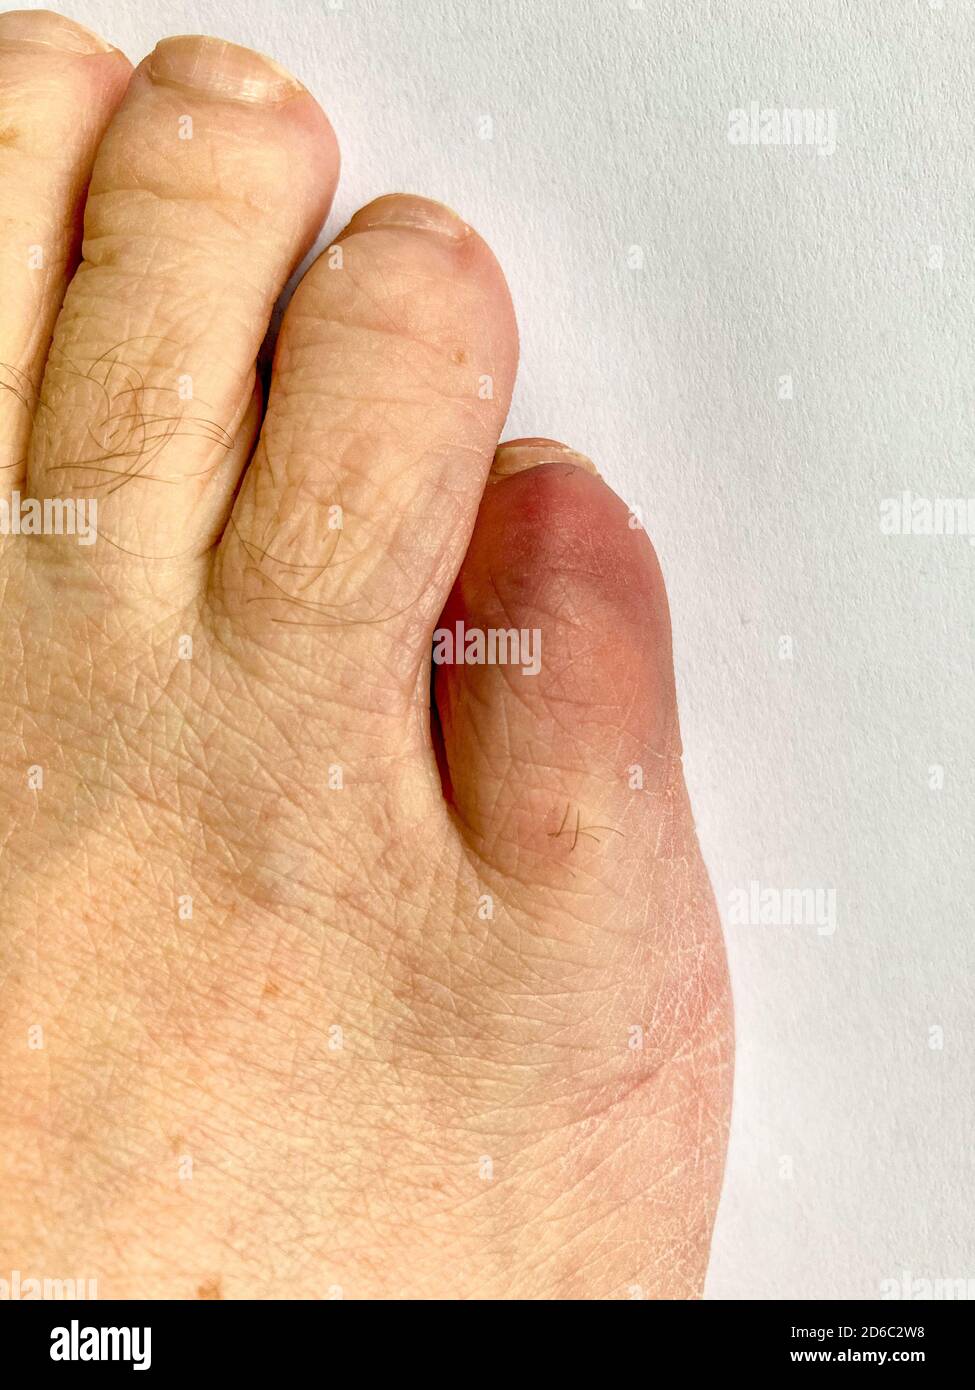 Close up on the broken little toe of a senior man showing discoloration at the site of the trauma viewed top down Stock Photo